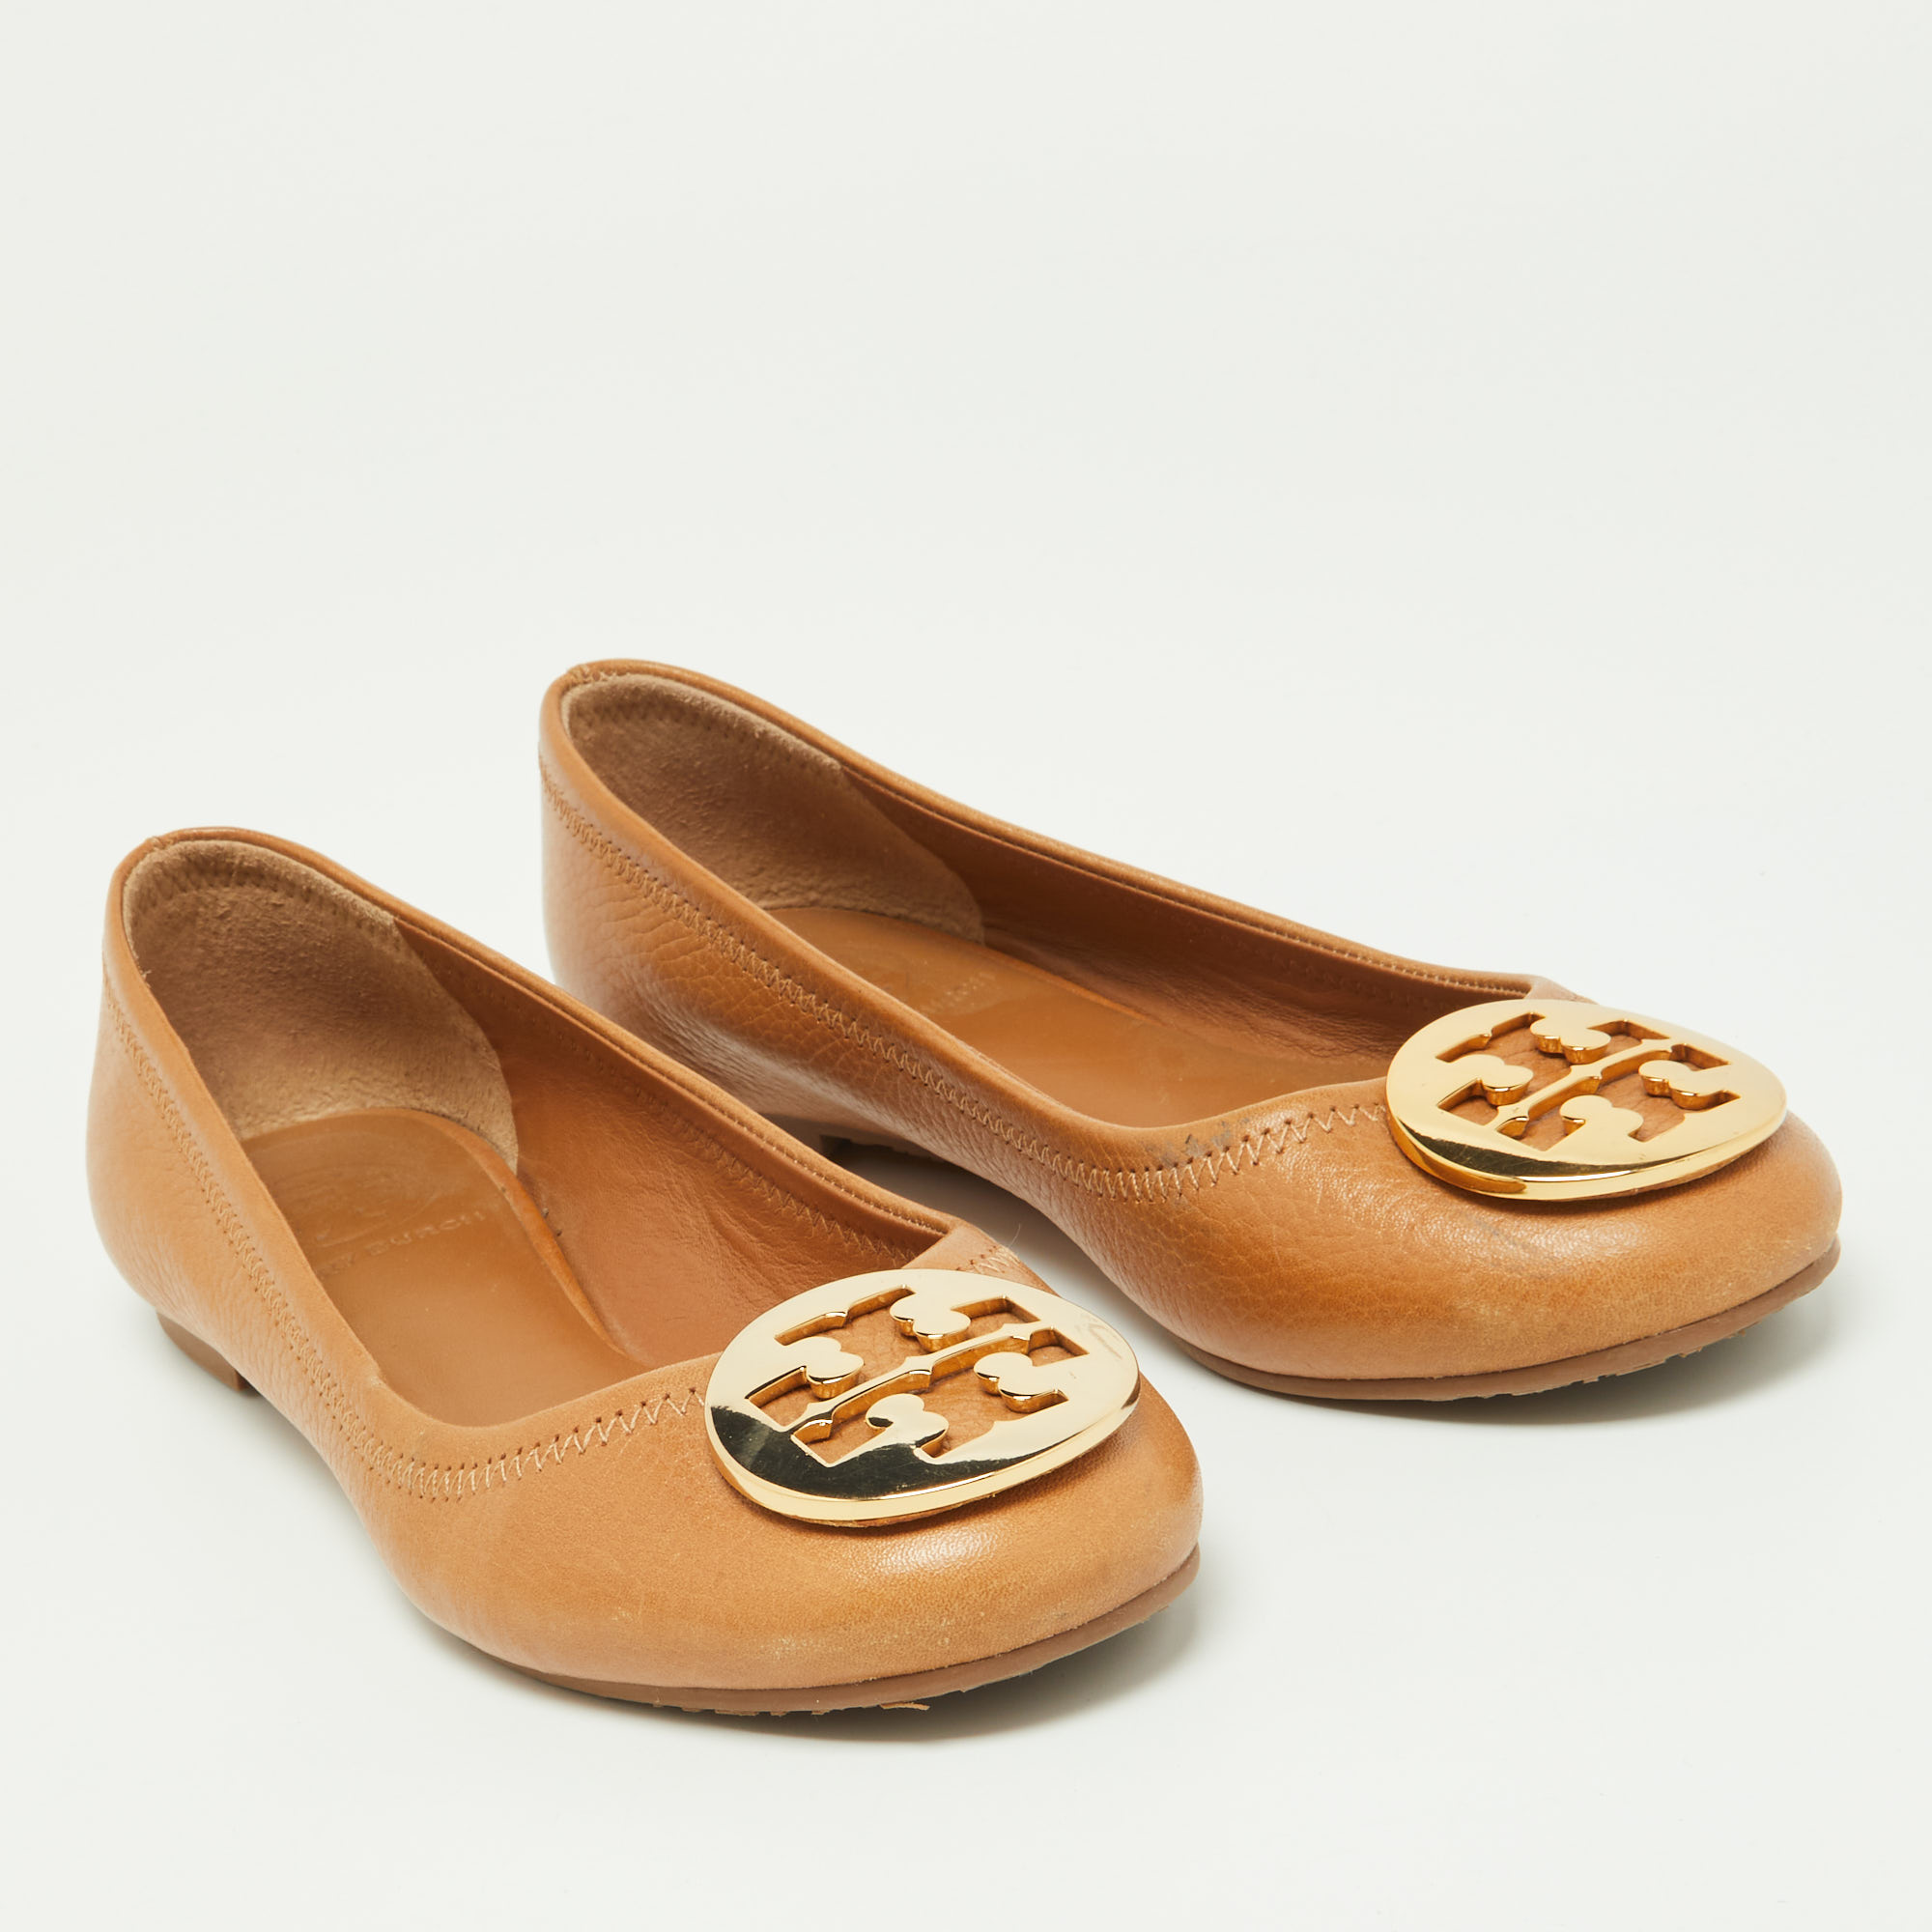 Tory Burch Brown Leather Reva Pebbled Ballet Flats Size 35.5